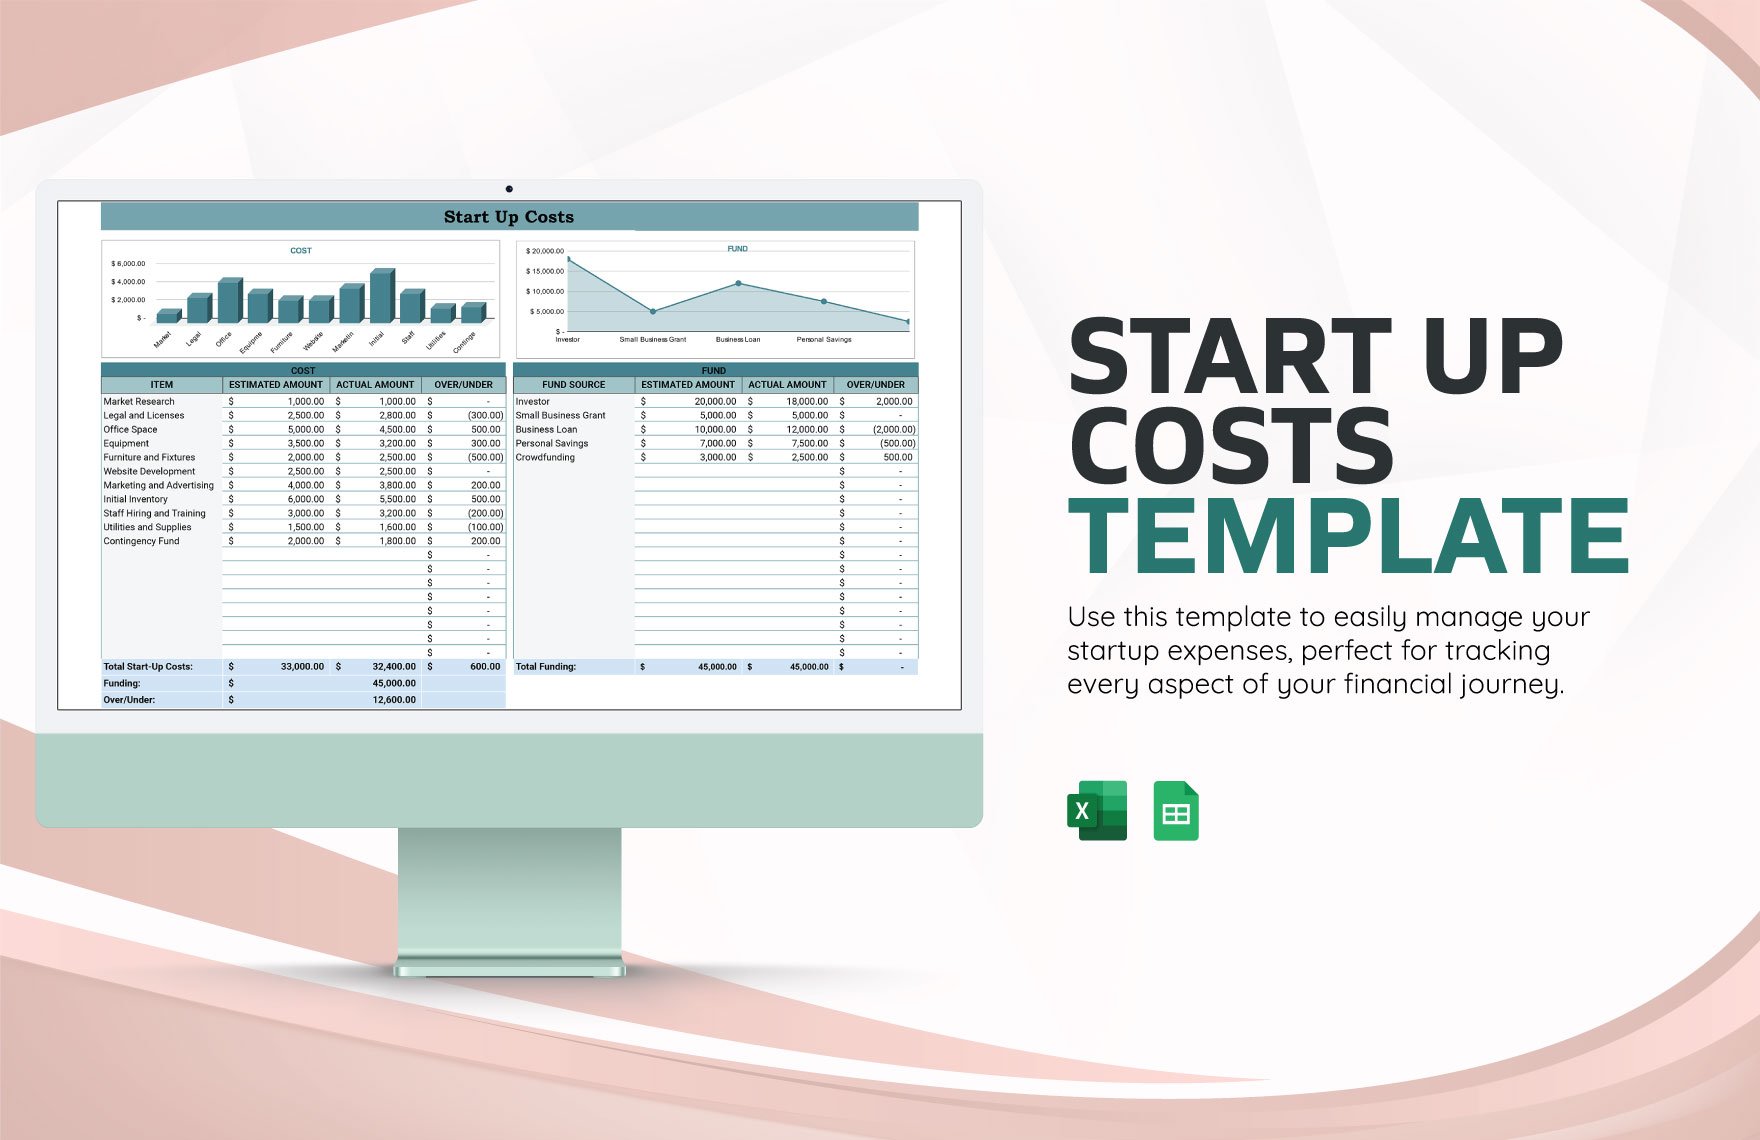 Start Up Costs Template in Excel, Google Sheets